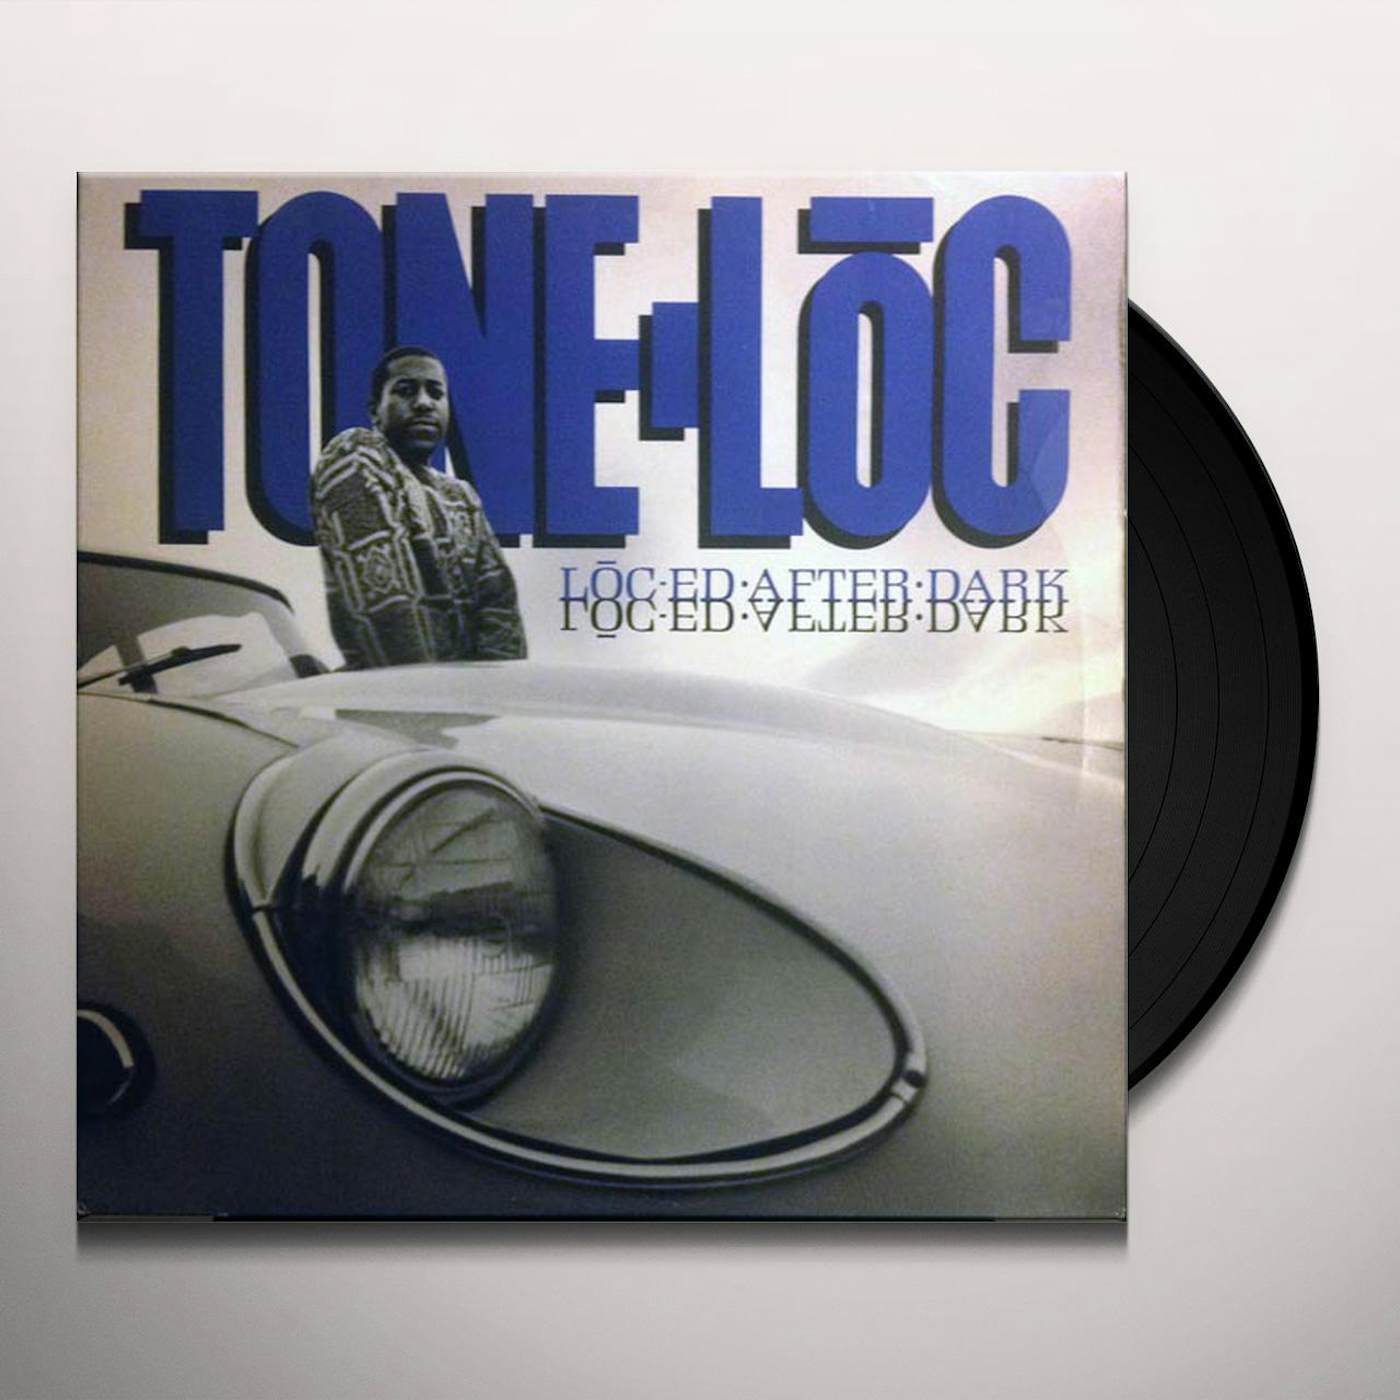 Tone-Loc LOCED AFTER DARK / FUNKY COLD Vinyl Record